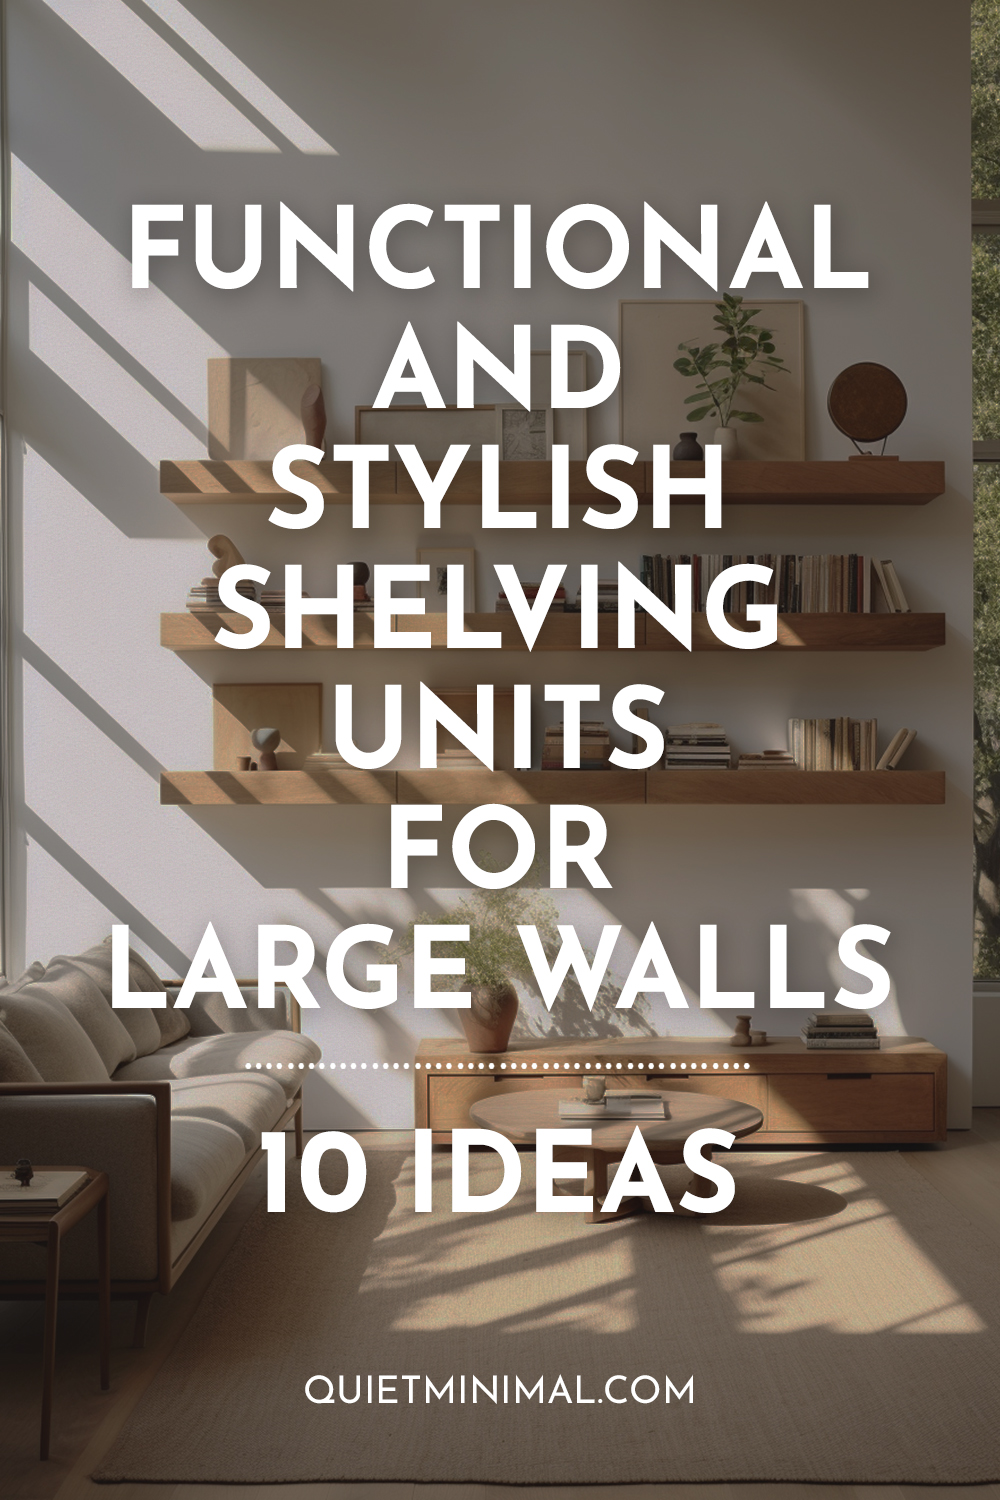 Functional and stylish shelving units for large walls - discover 10 inspiring ideas.